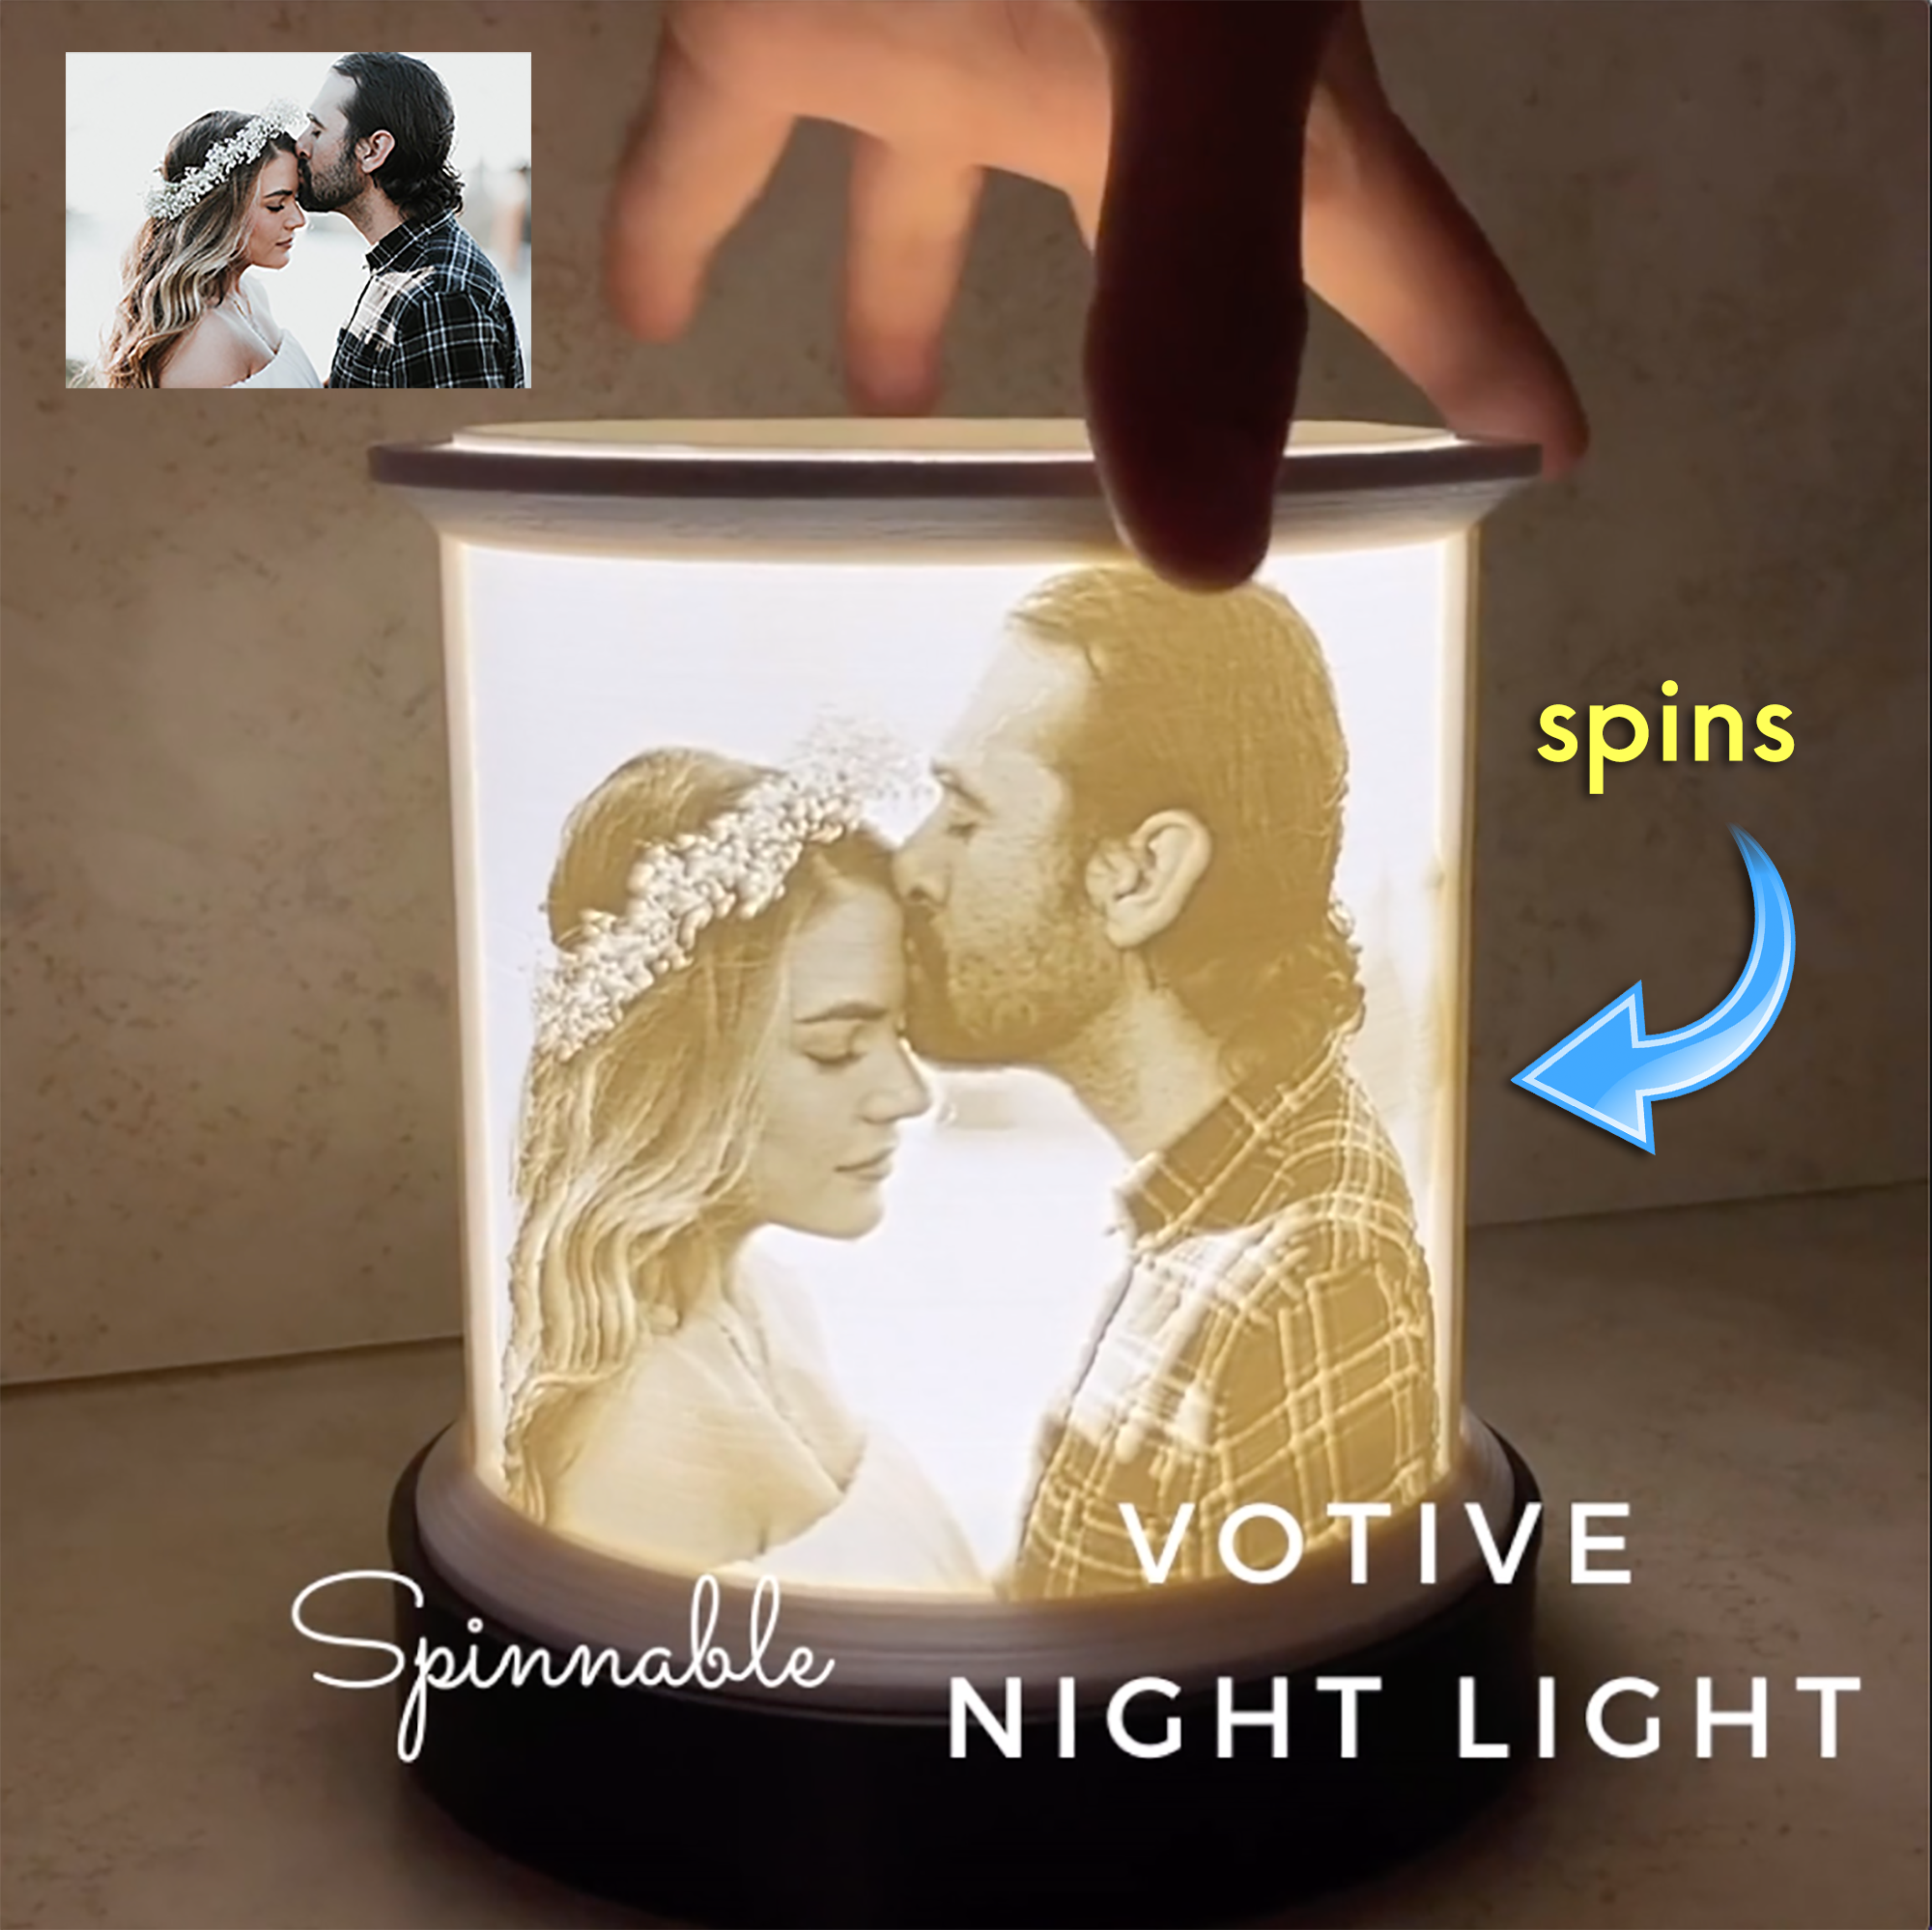 Custom Photo Spinnable Votive Night Light (3 photos per light) - Perfect  Gift for Birthday Gift, Wedding Gift, Anniversary Gift, Valentine's Day  Gift, Graduation Gift, Memoriam, Memorial Gift, Christmas Gift [SOLD OUT]